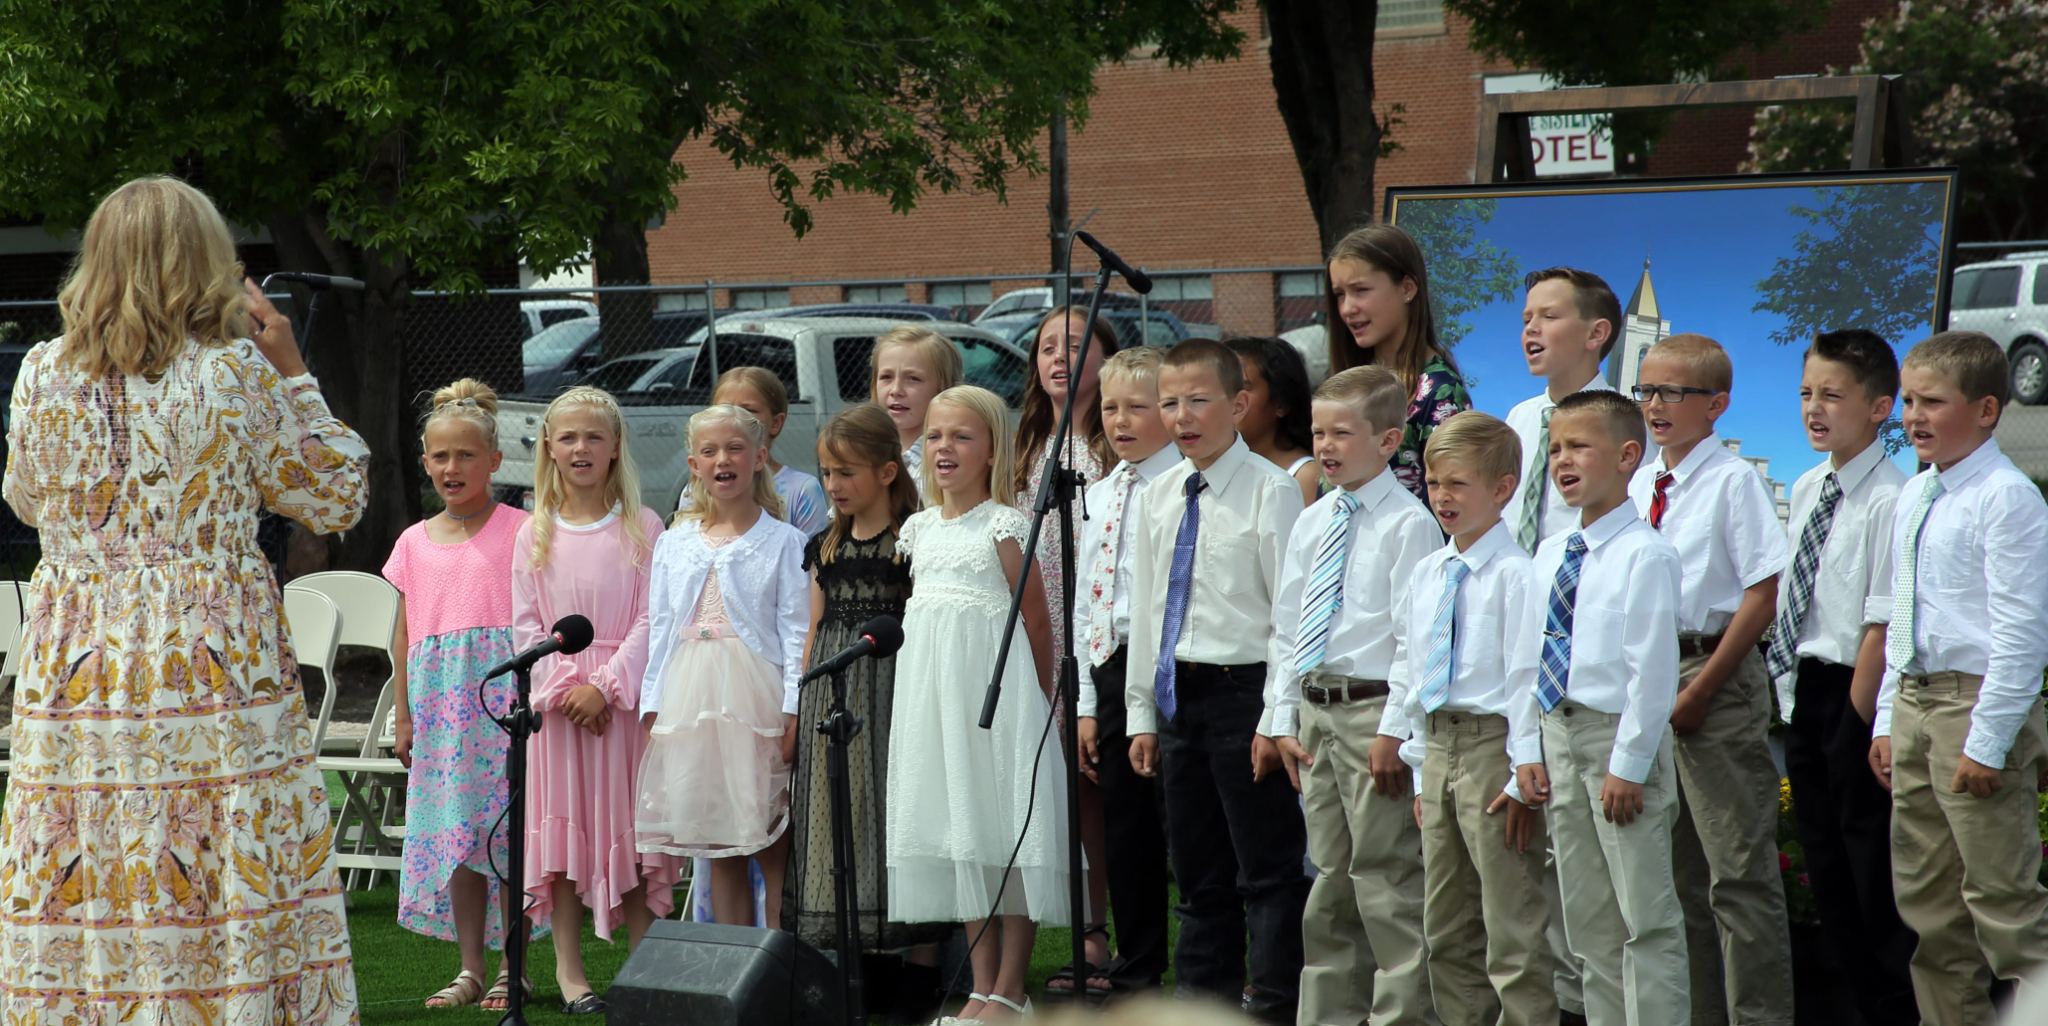 A group of Primary-aged boys and girls in Sunday best singing, with a woman in a flowery dress conducting them.